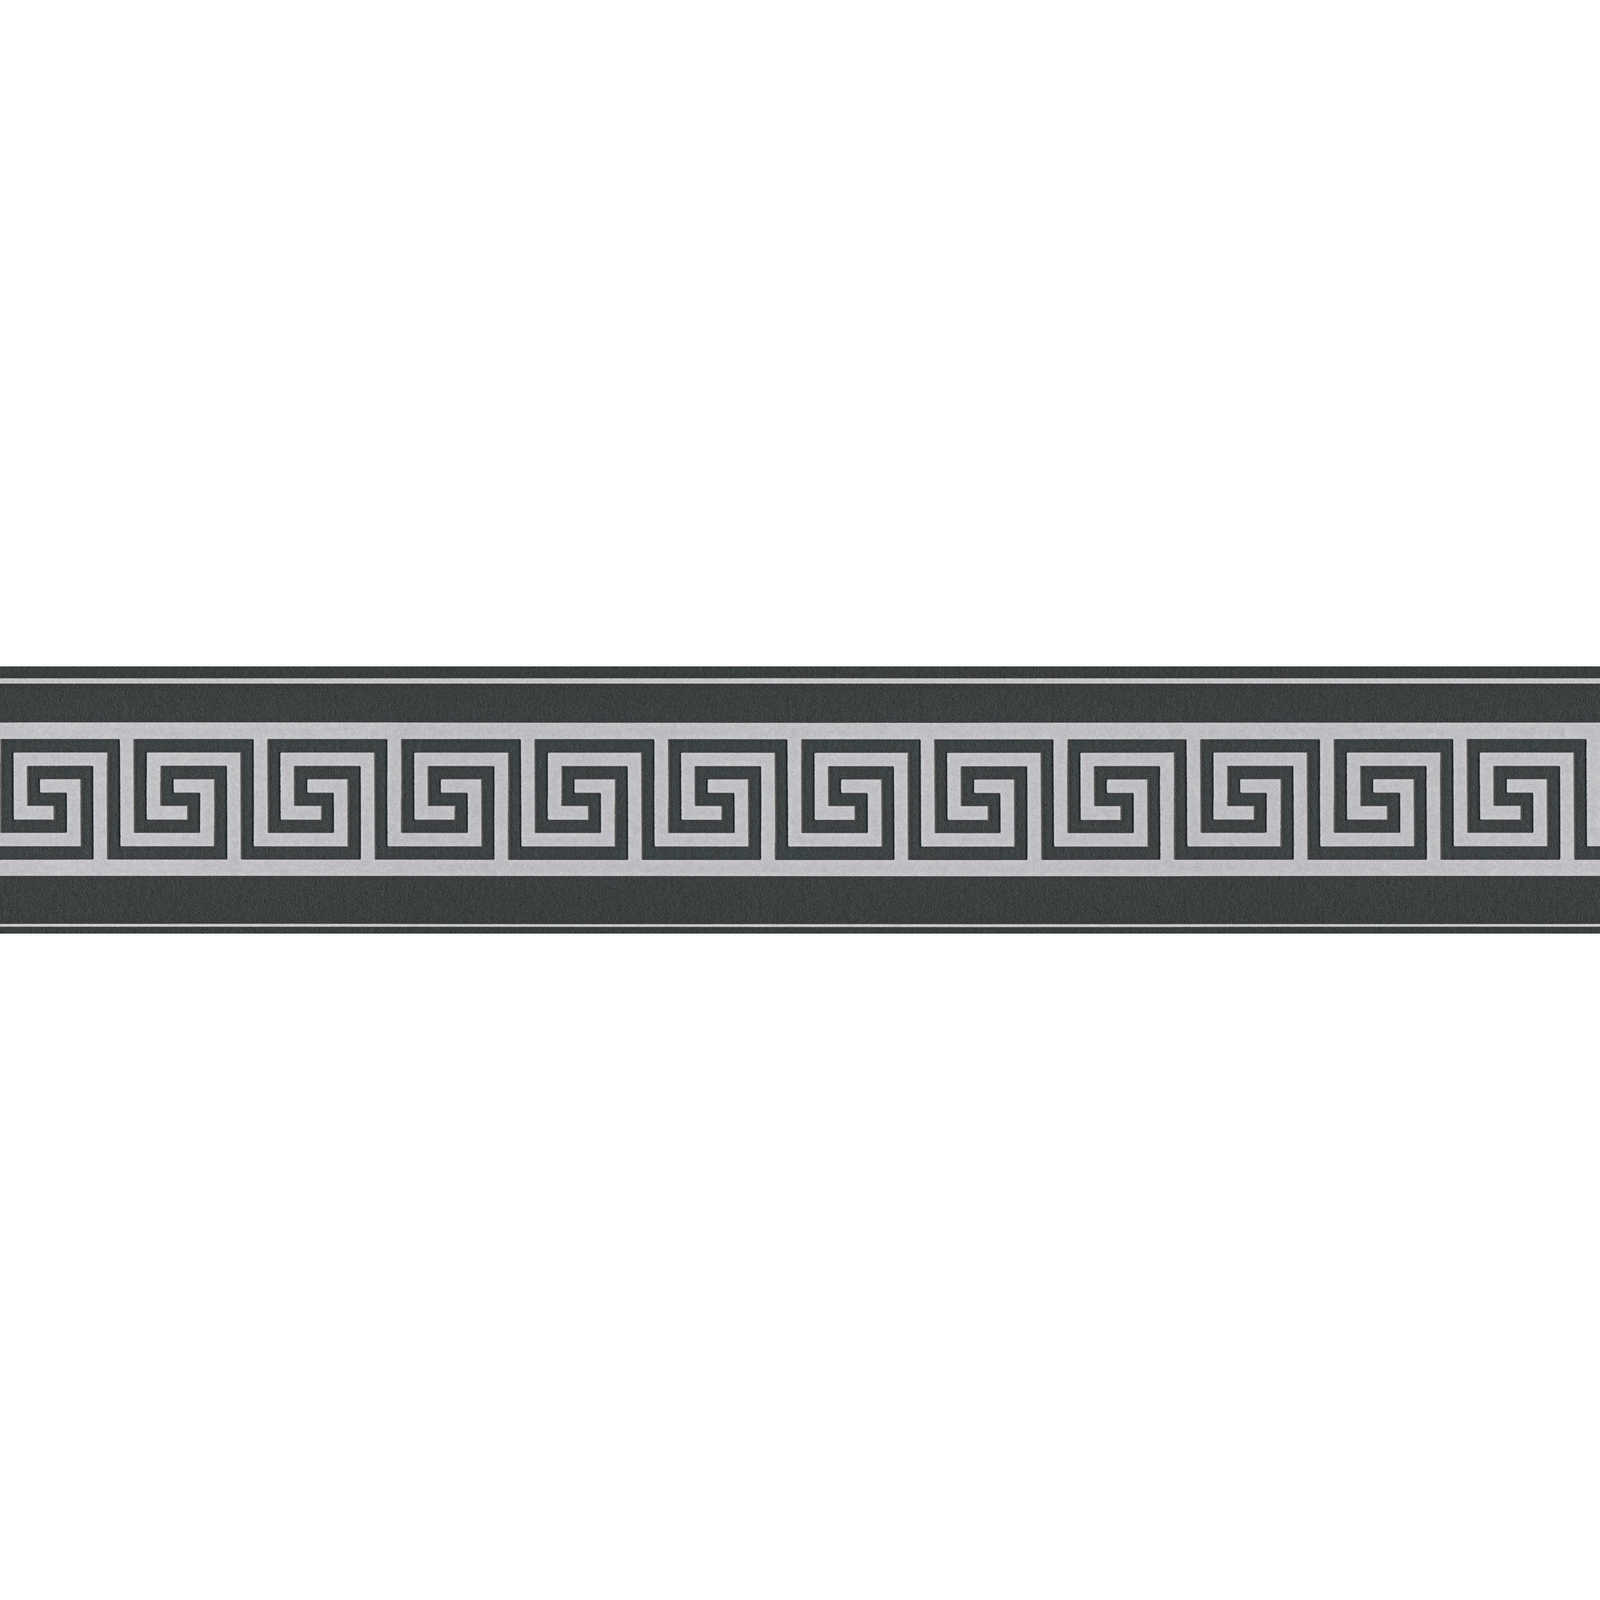         Black border for wall designs in classic style
    